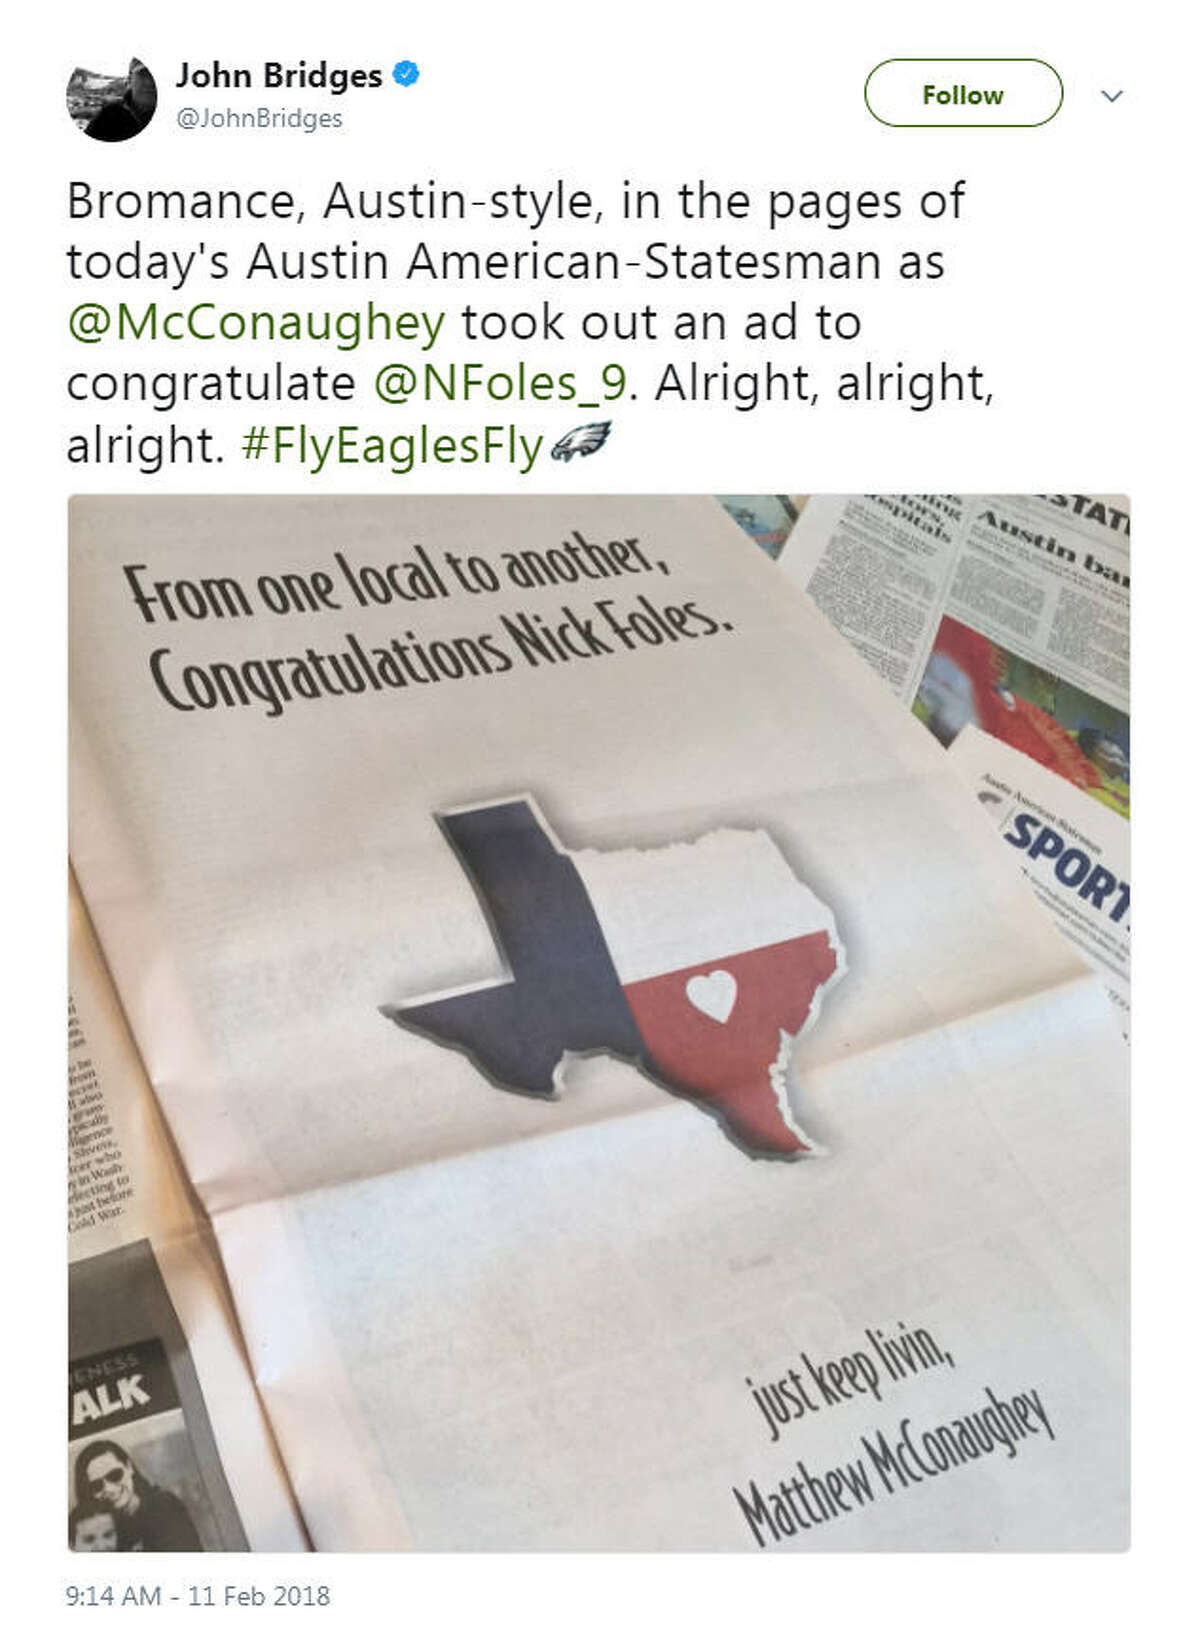 According to the managing editor of the Austin American Statesman, John Bridges, Matthew McConaughey took out an ad to give a shout out to fellow Austin-native Nick Foles for winning the Superbowl. Source: Twitter